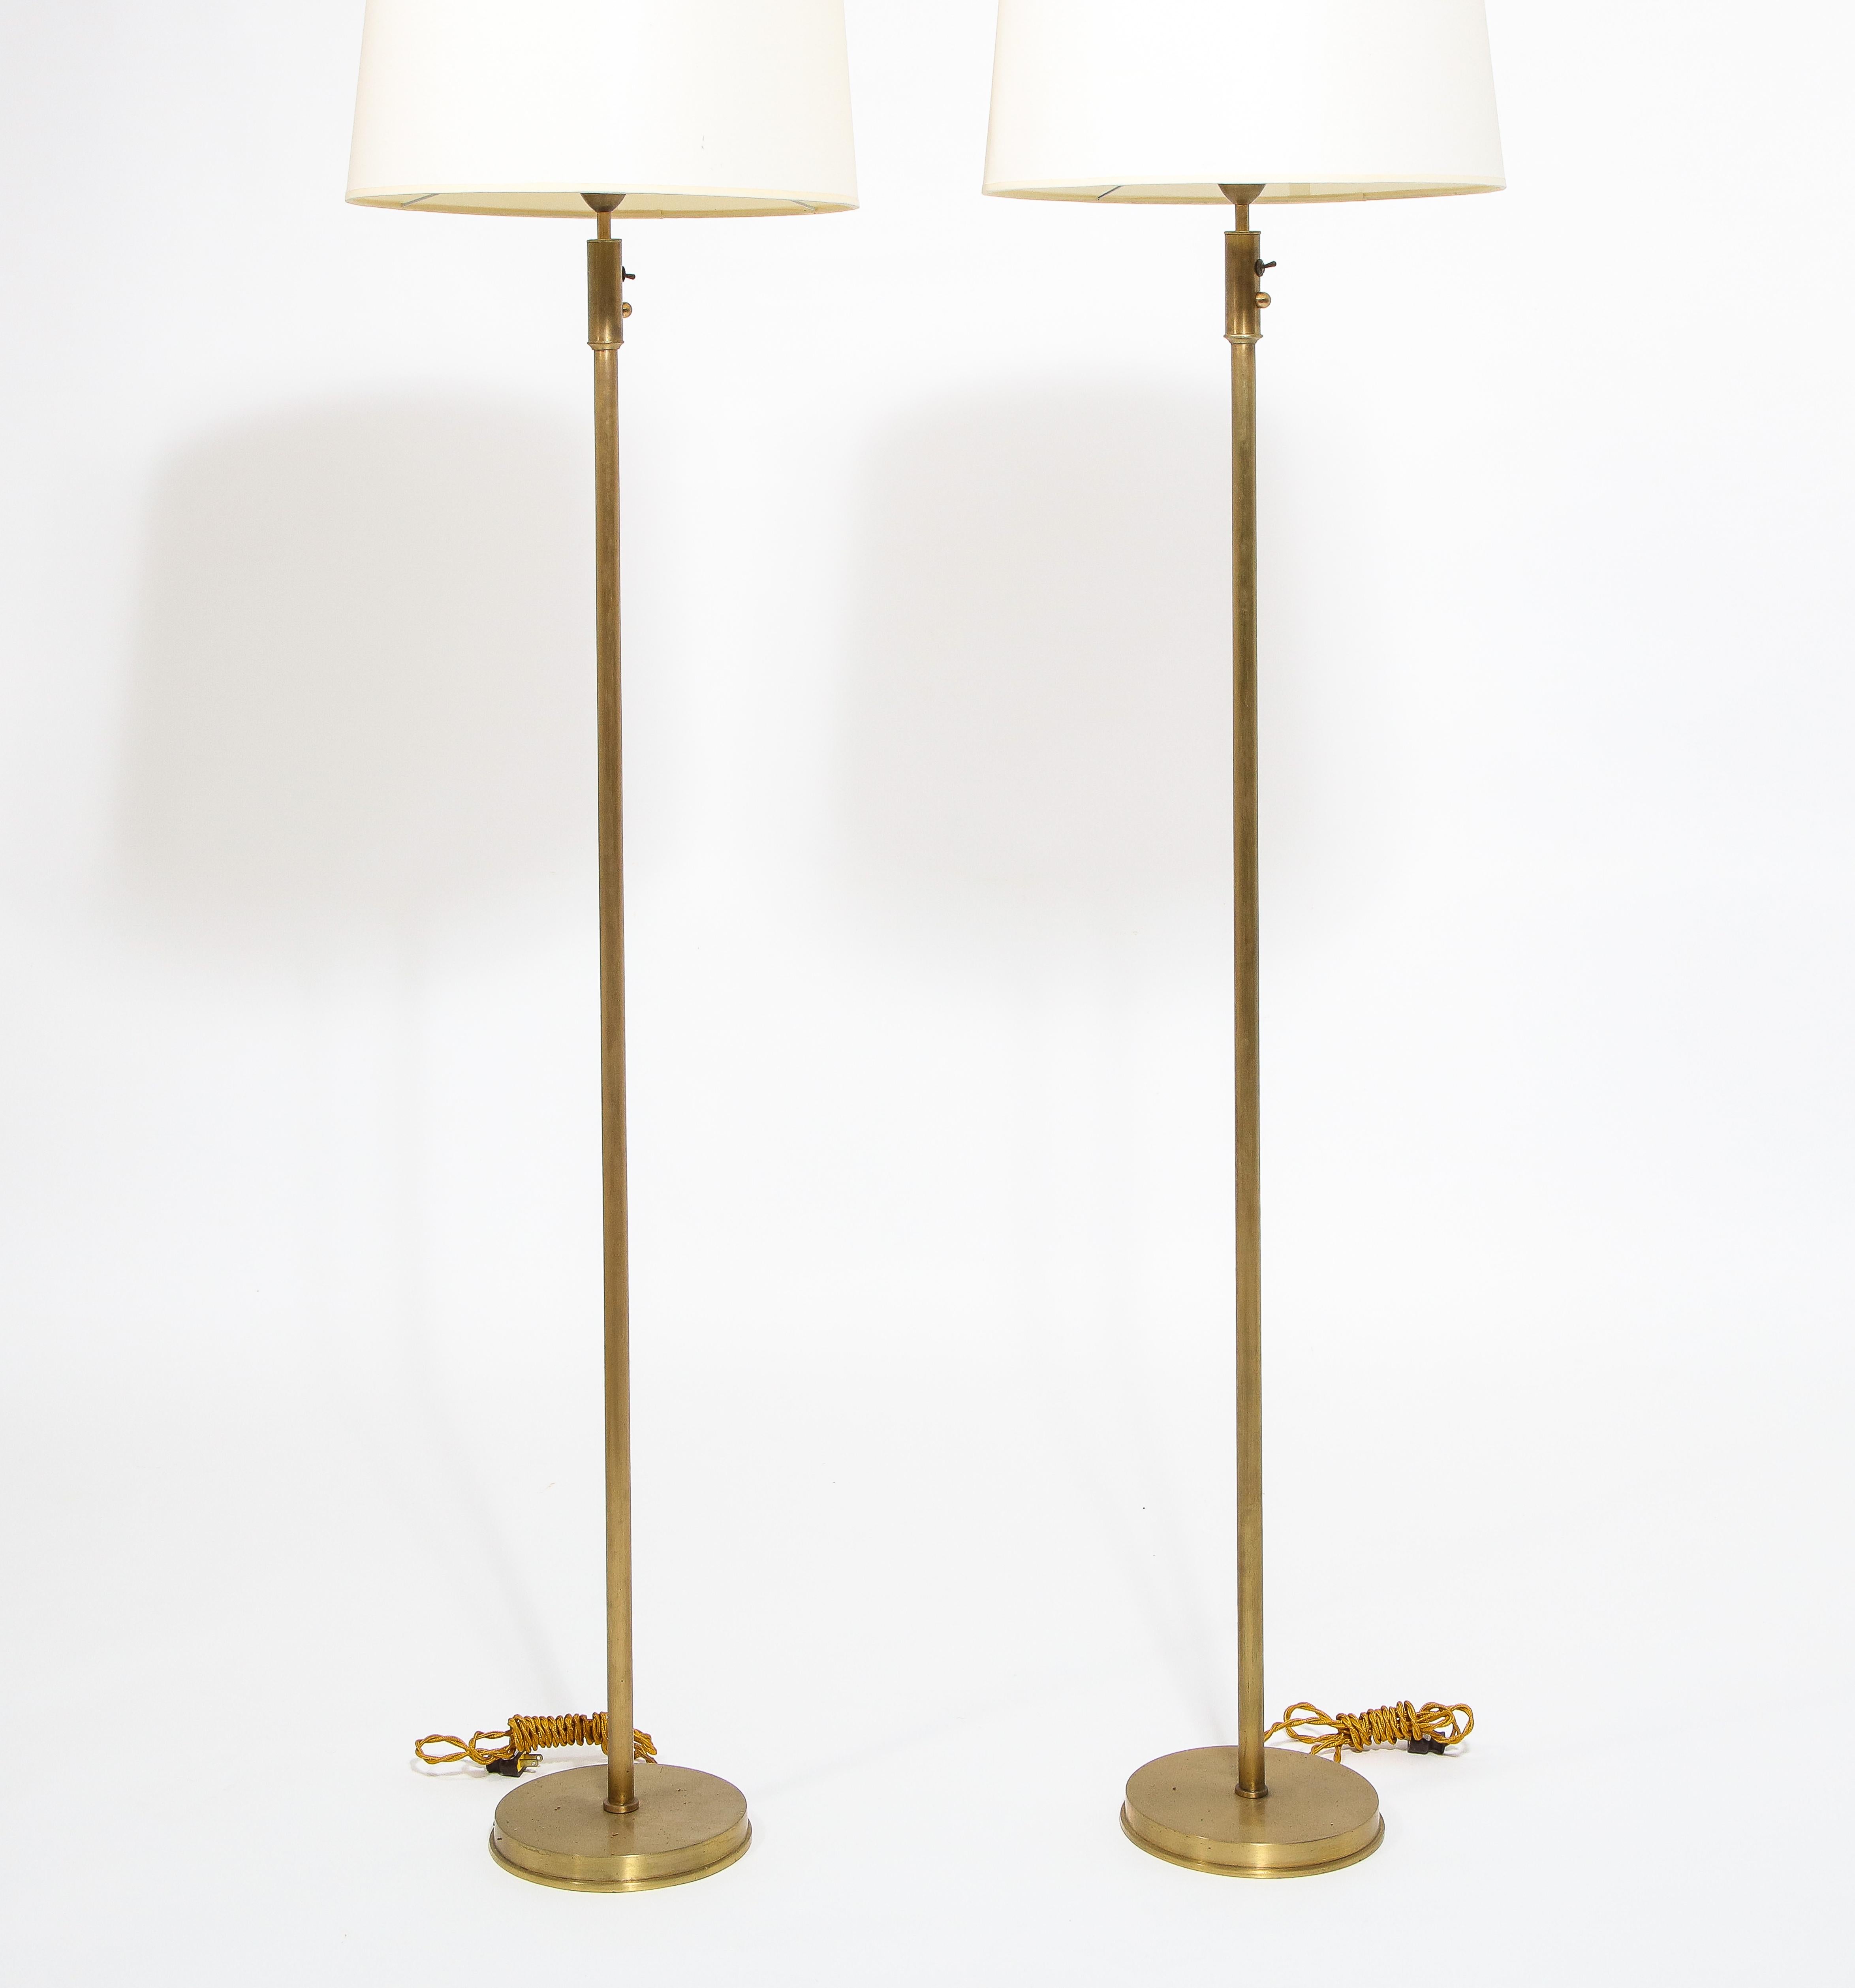 Pair of Brushed Brass Floor Lamps, France 1960's For Sale 3